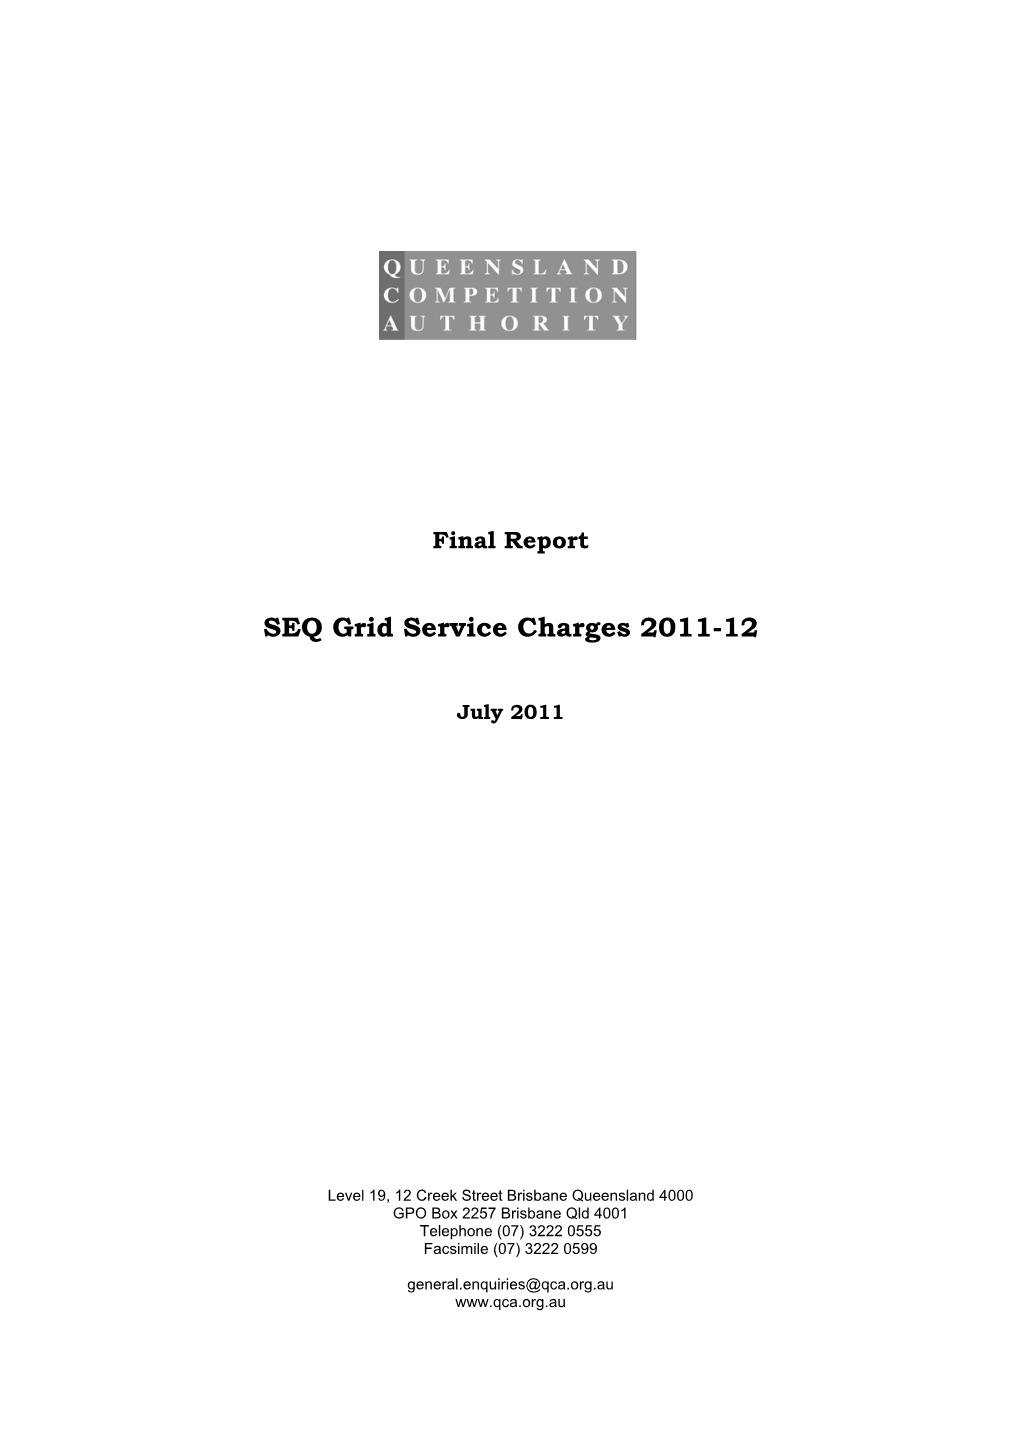 SEQ Grid Service Charges 2011-12